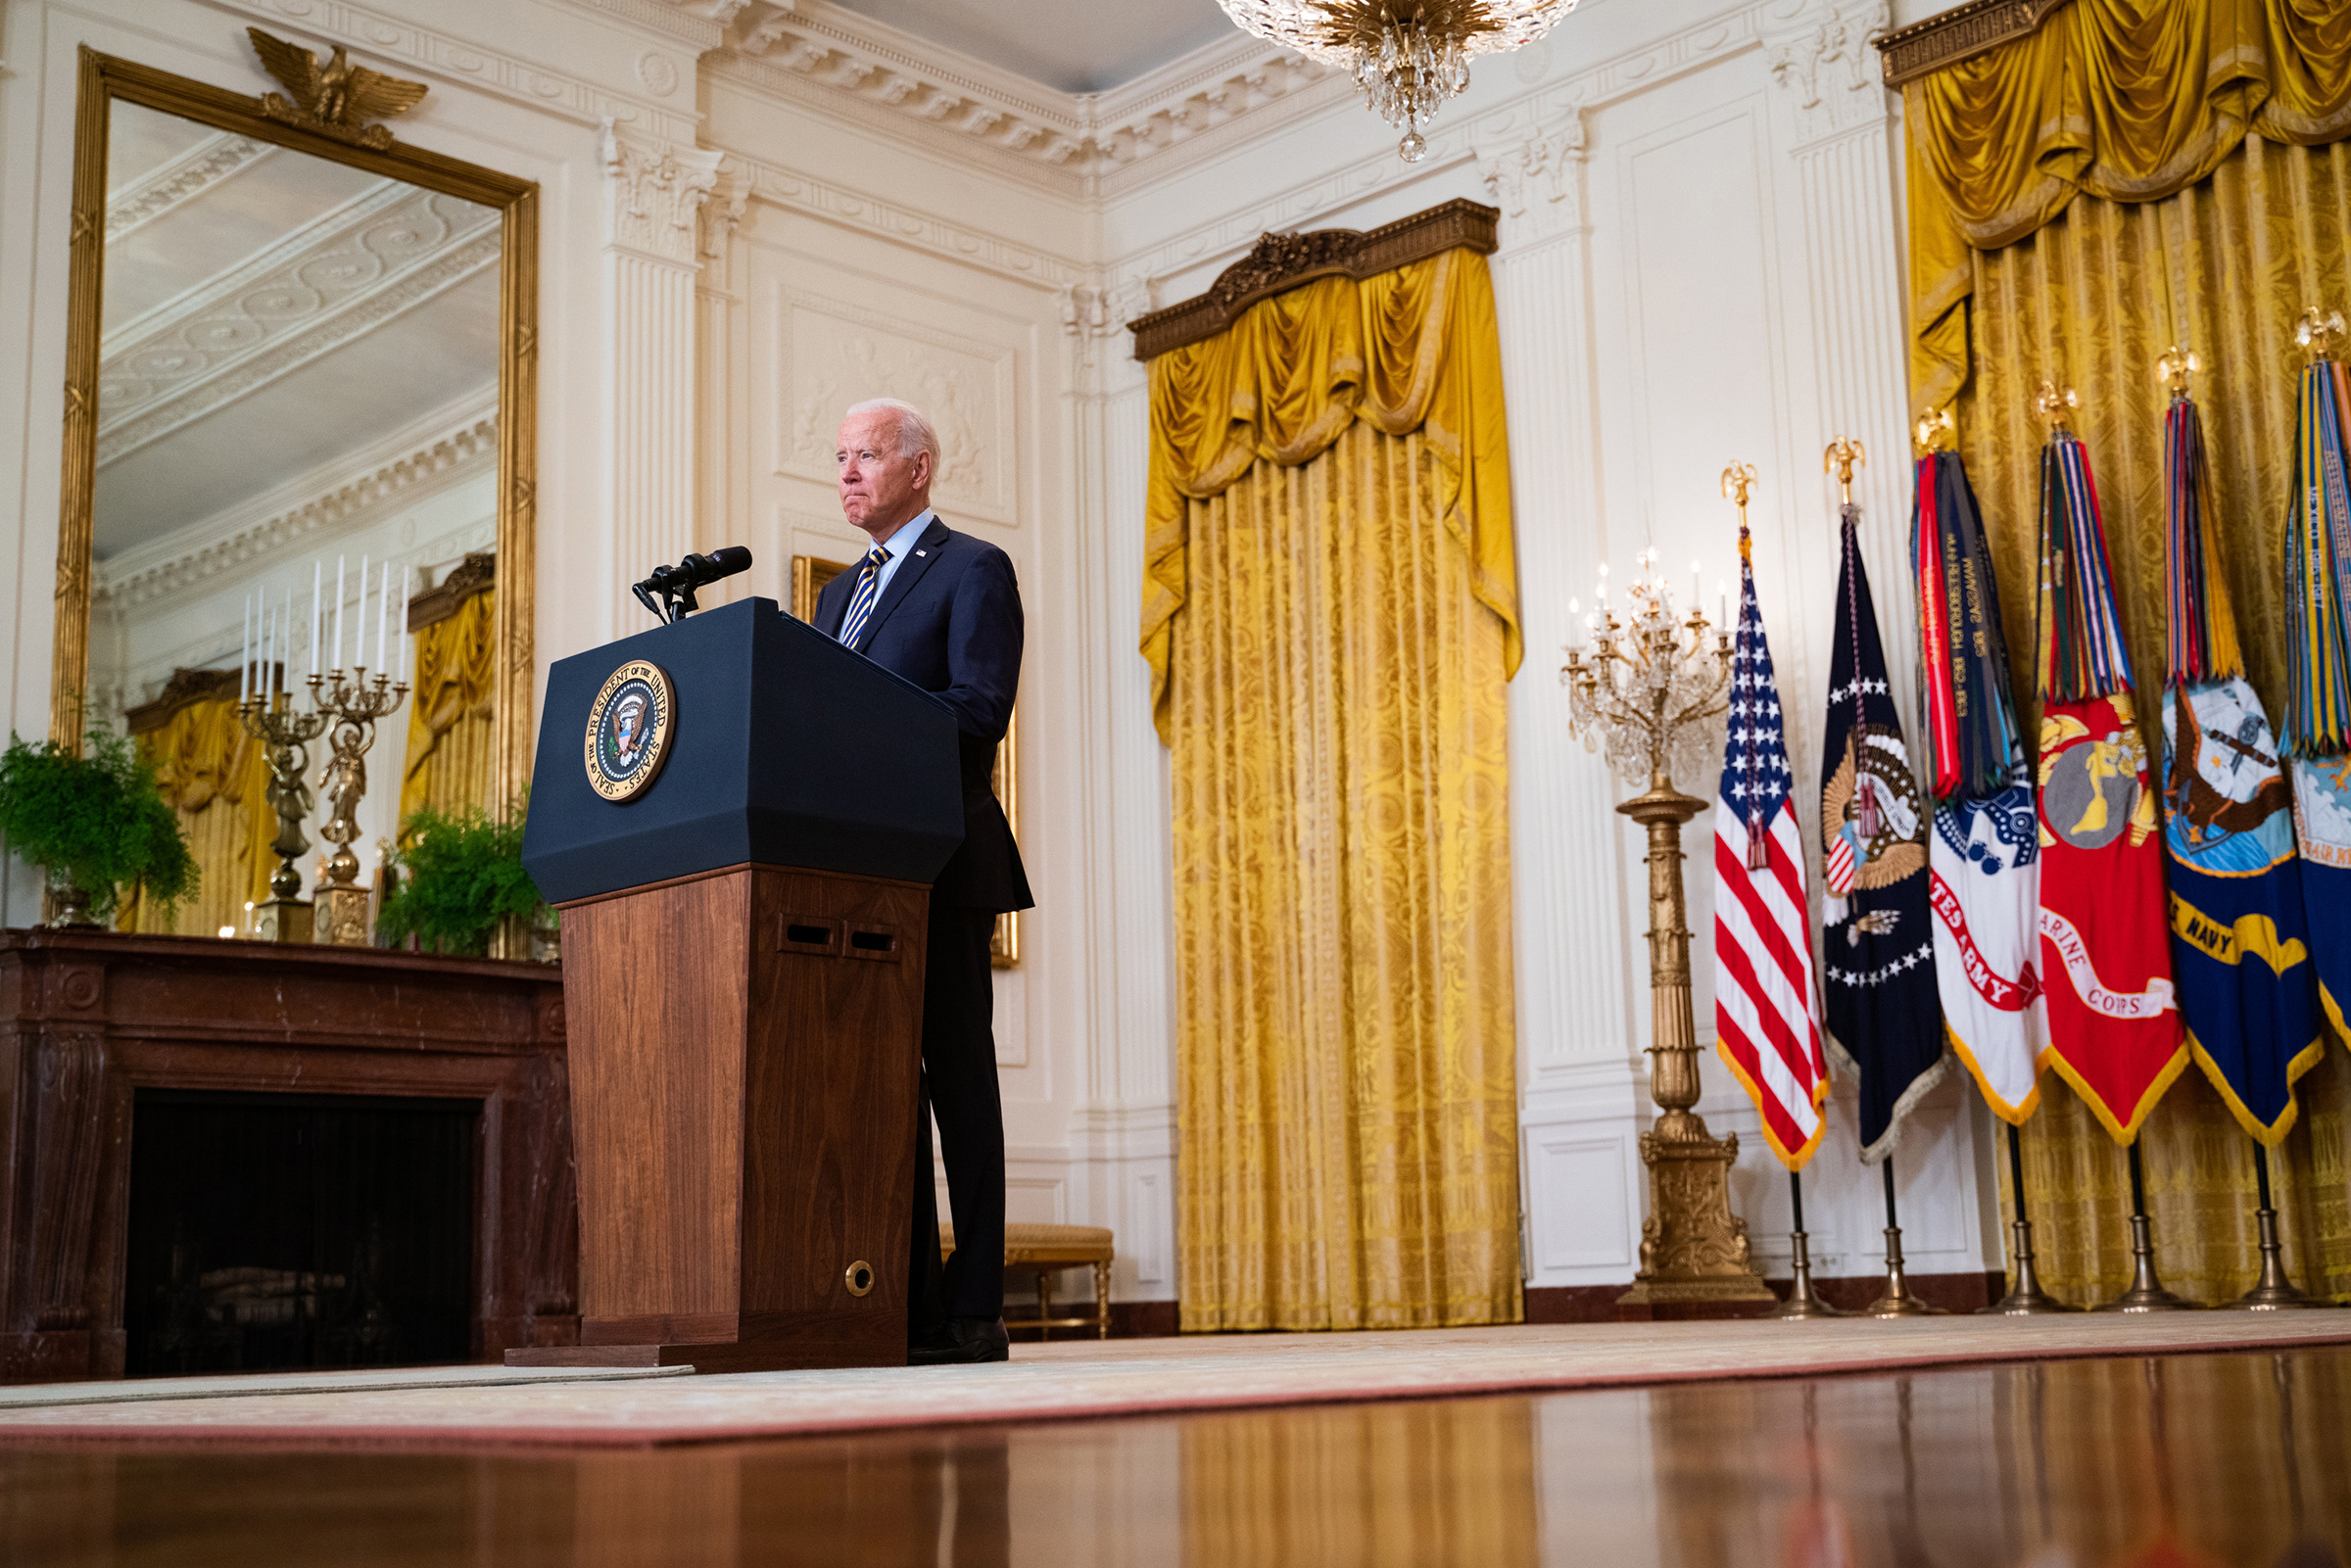 President Biden delivers remarks about the U.S. withdrawal from Afghanistan at the White House in Washington, D.C., on July 8, 2021. (Sarahbeth Maney—The New York Times/Redux)